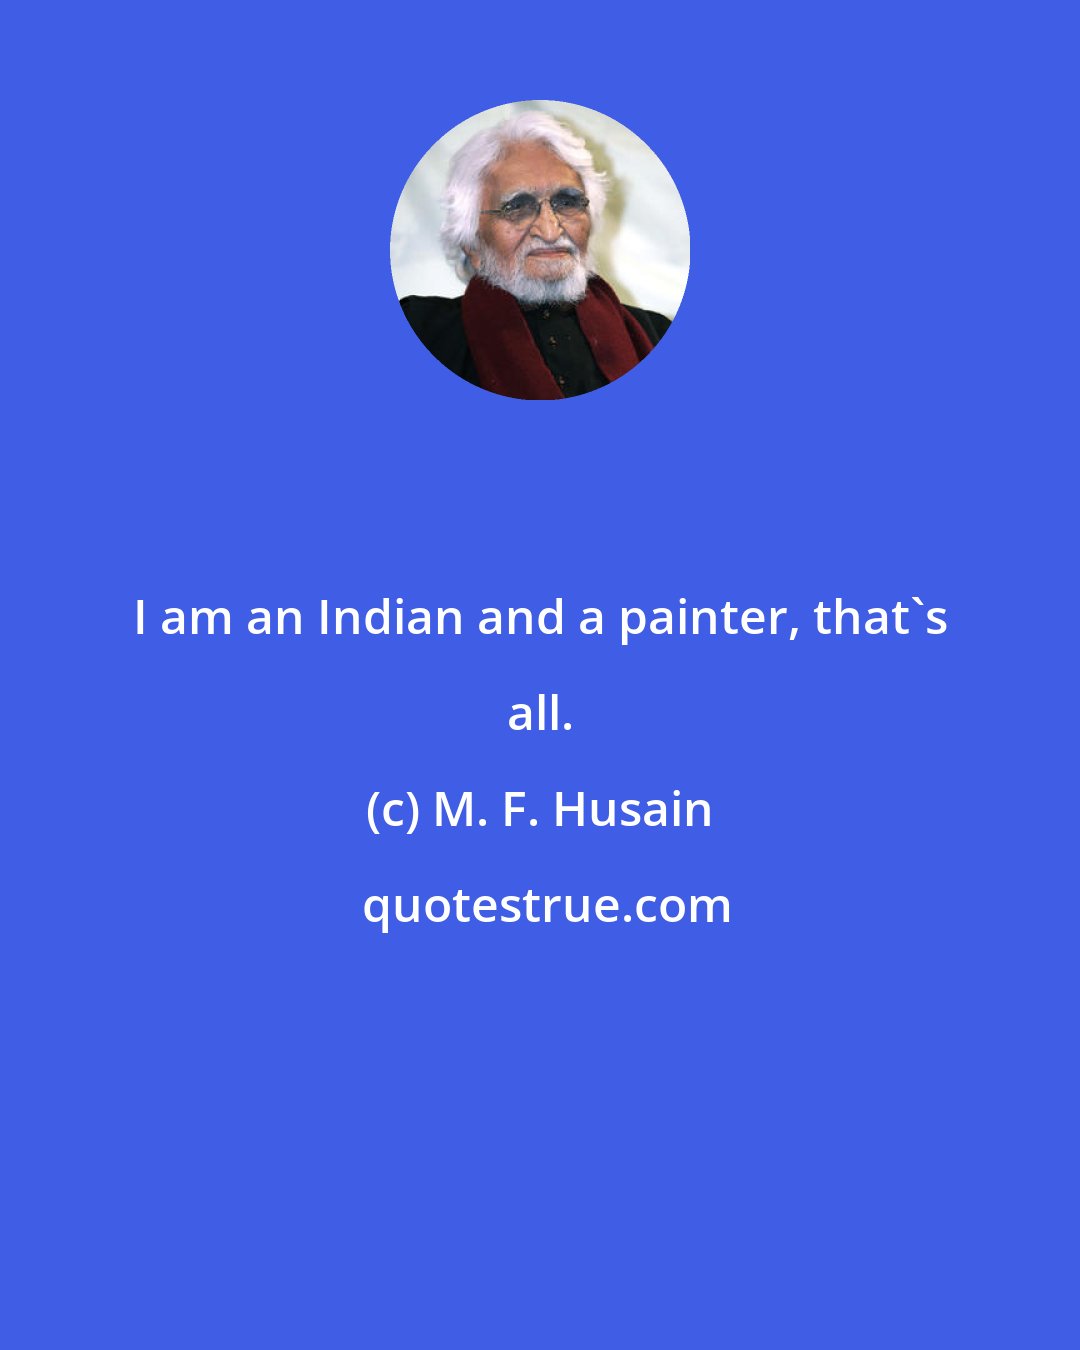 M. F. Husain: I am an Indian and a painter, that's all.